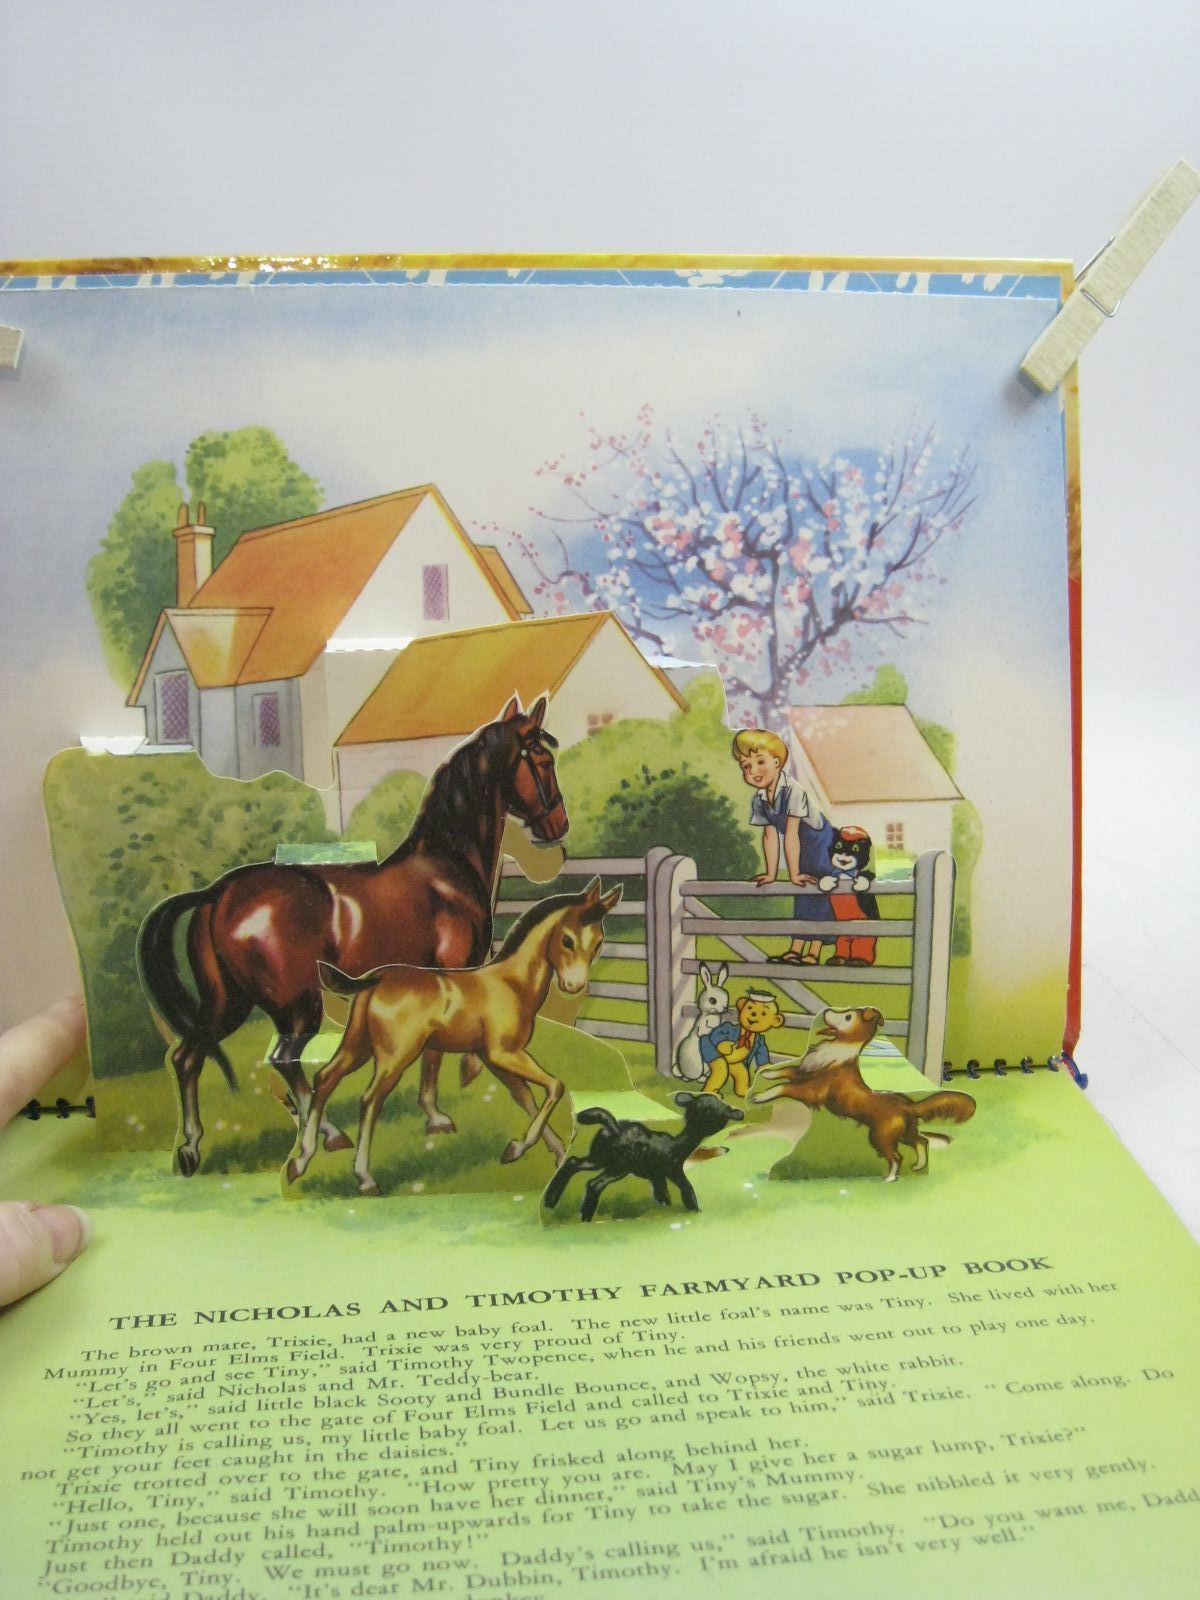 Photo of NICHOLAS AND TIMOTHY FARMYARD POP-UP STORY BOOK written by Styles, Kitty published by Sampson Low (STOCK CODE: 1404434)  for sale by Stella & Rose's Books